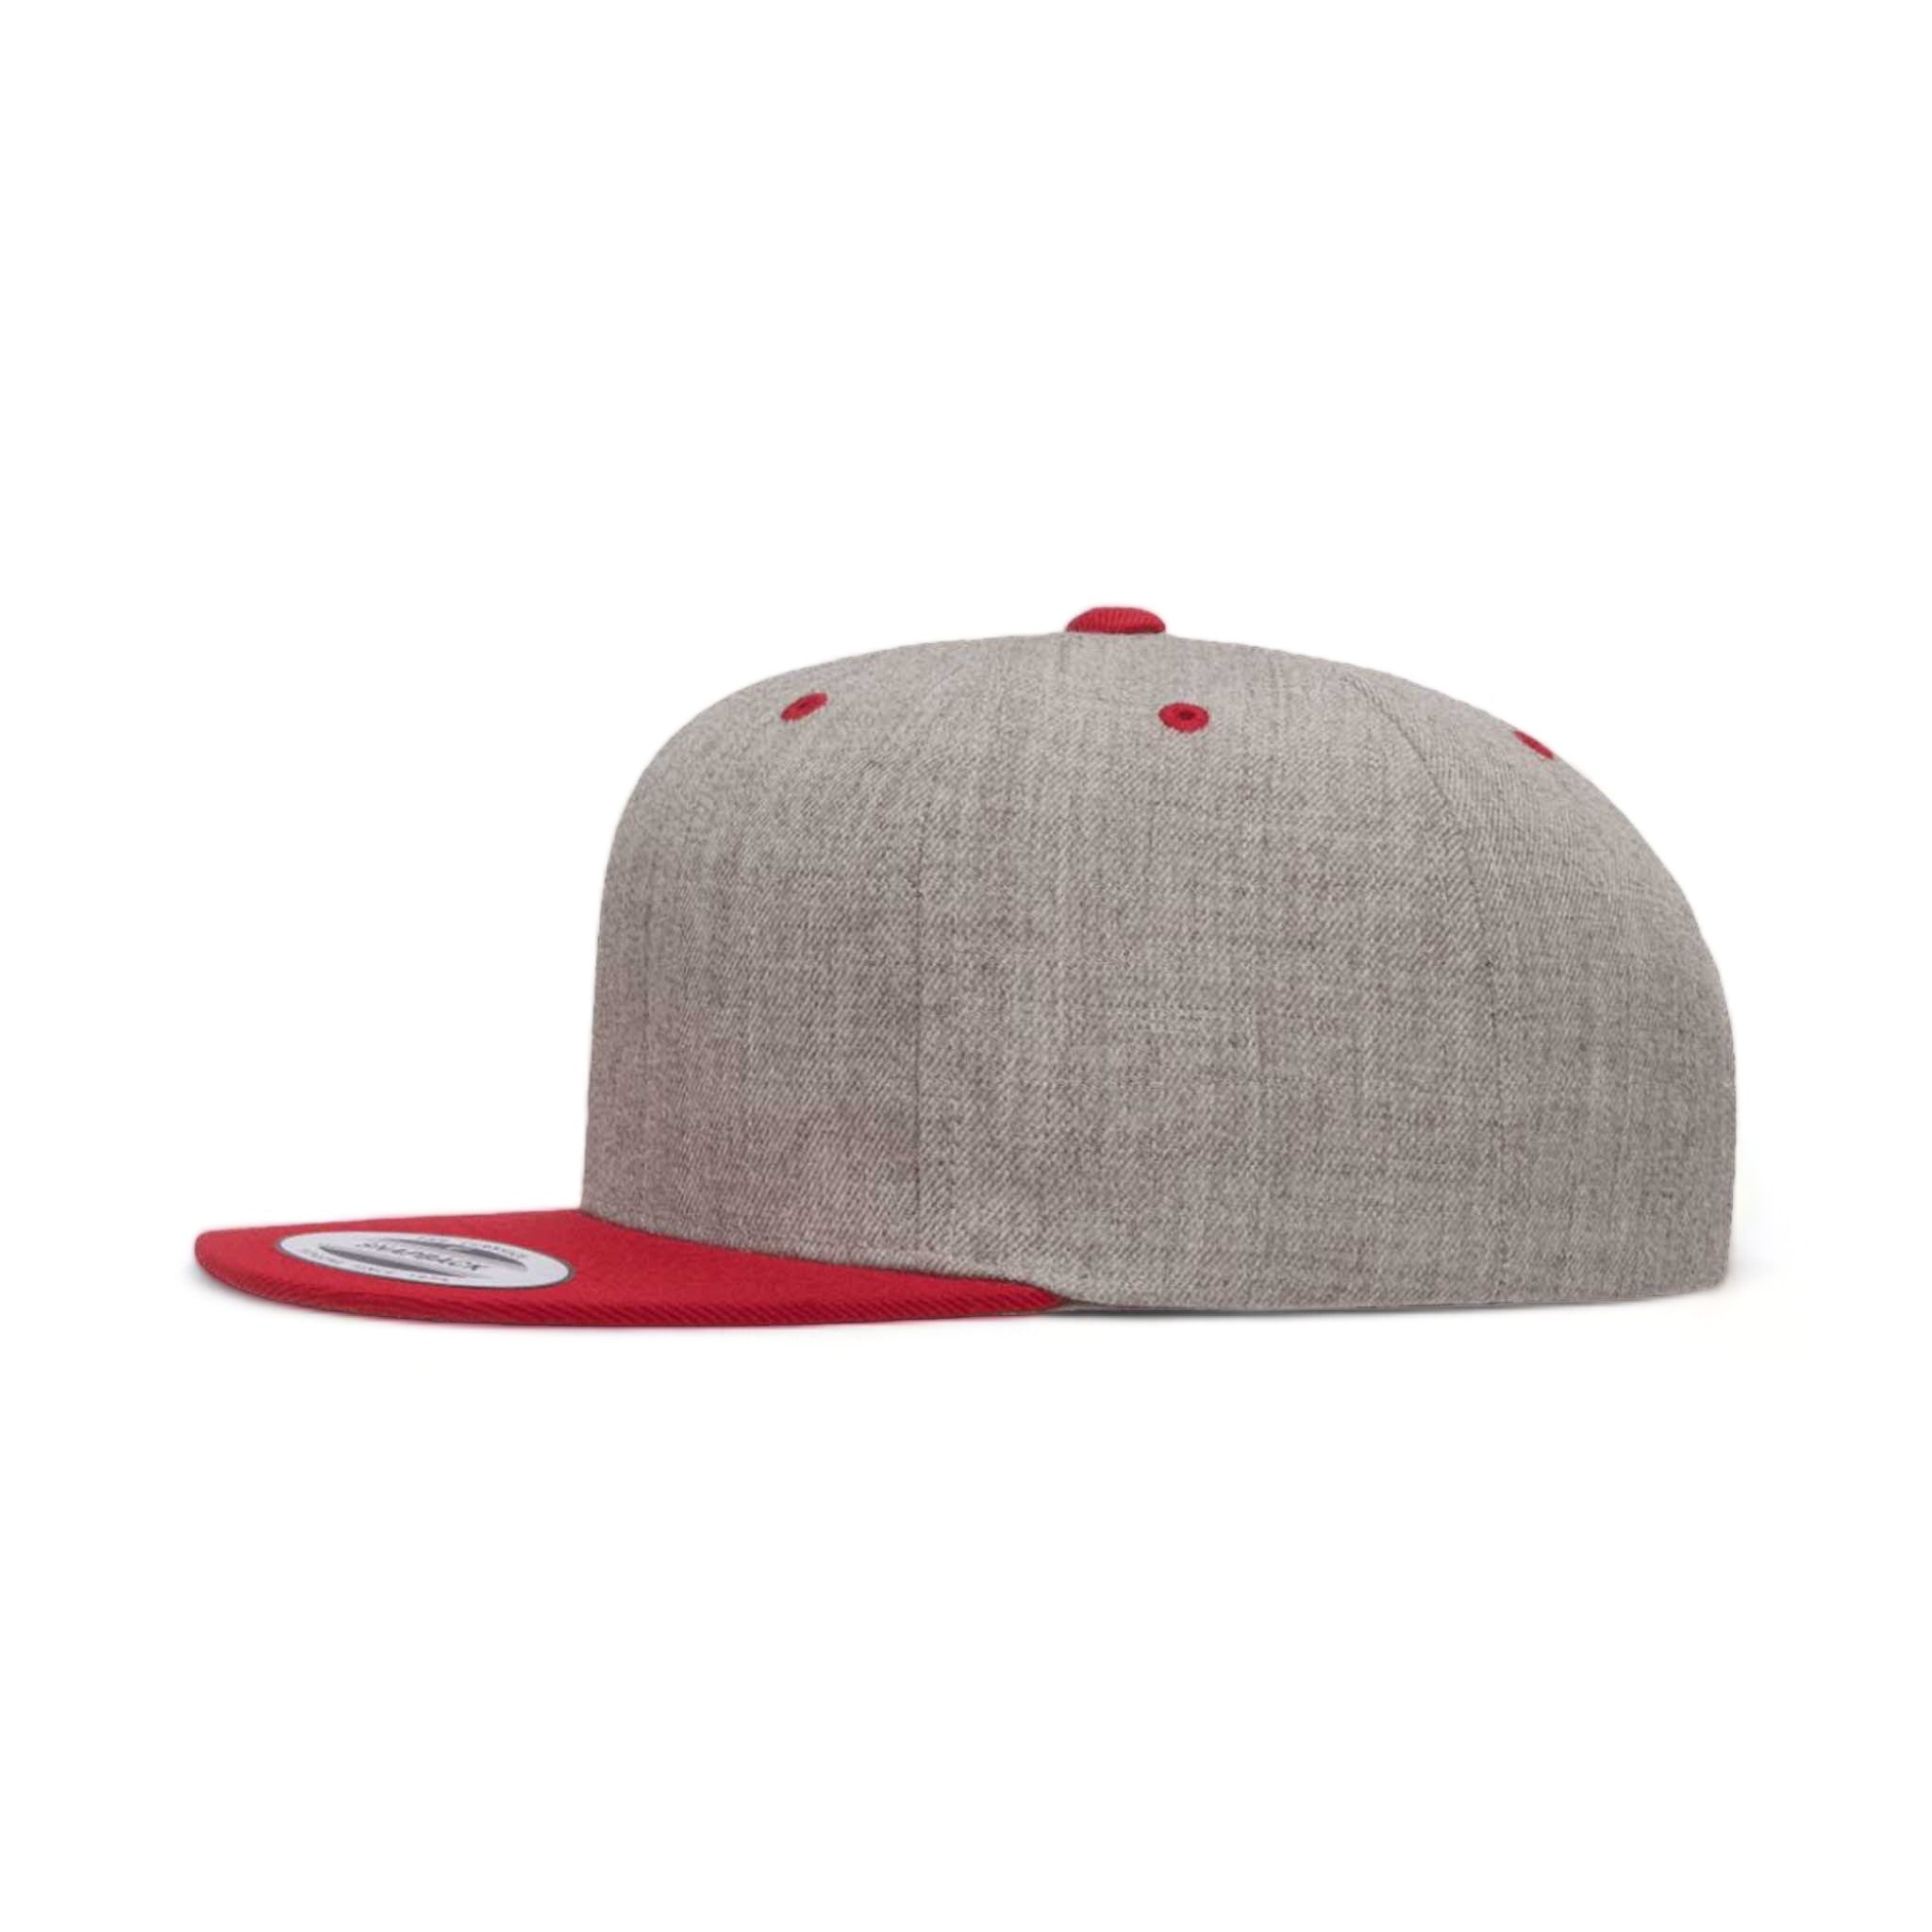 Side view of YP Classics 6089M custom hat in heather grey and red